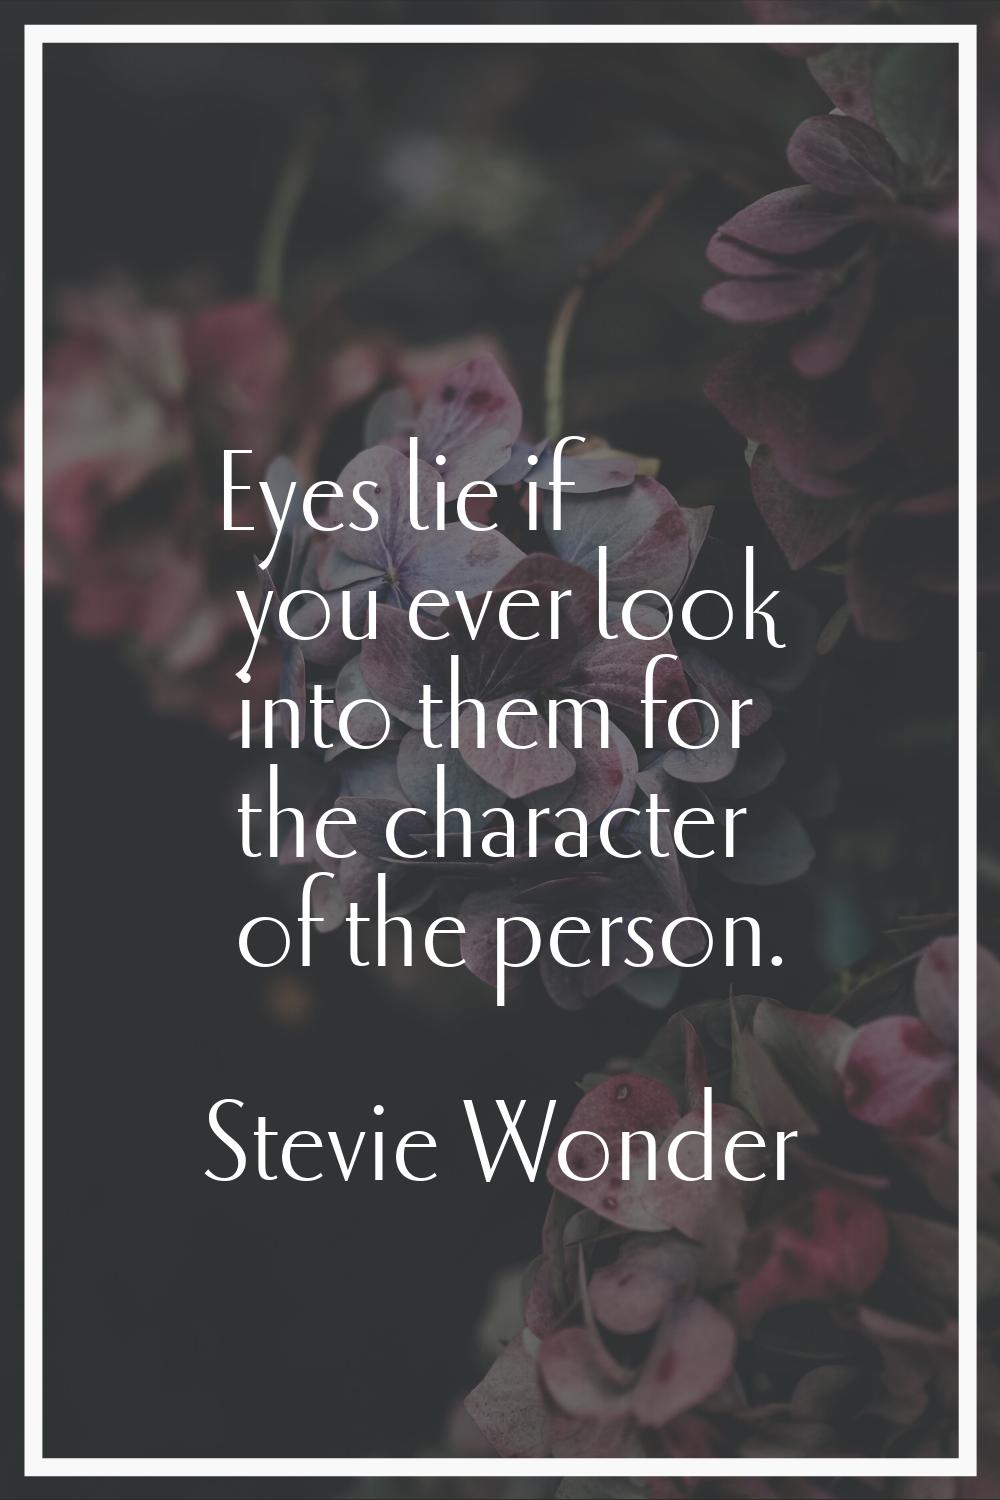 Eyes lie if you ever look into them for the character of the person.